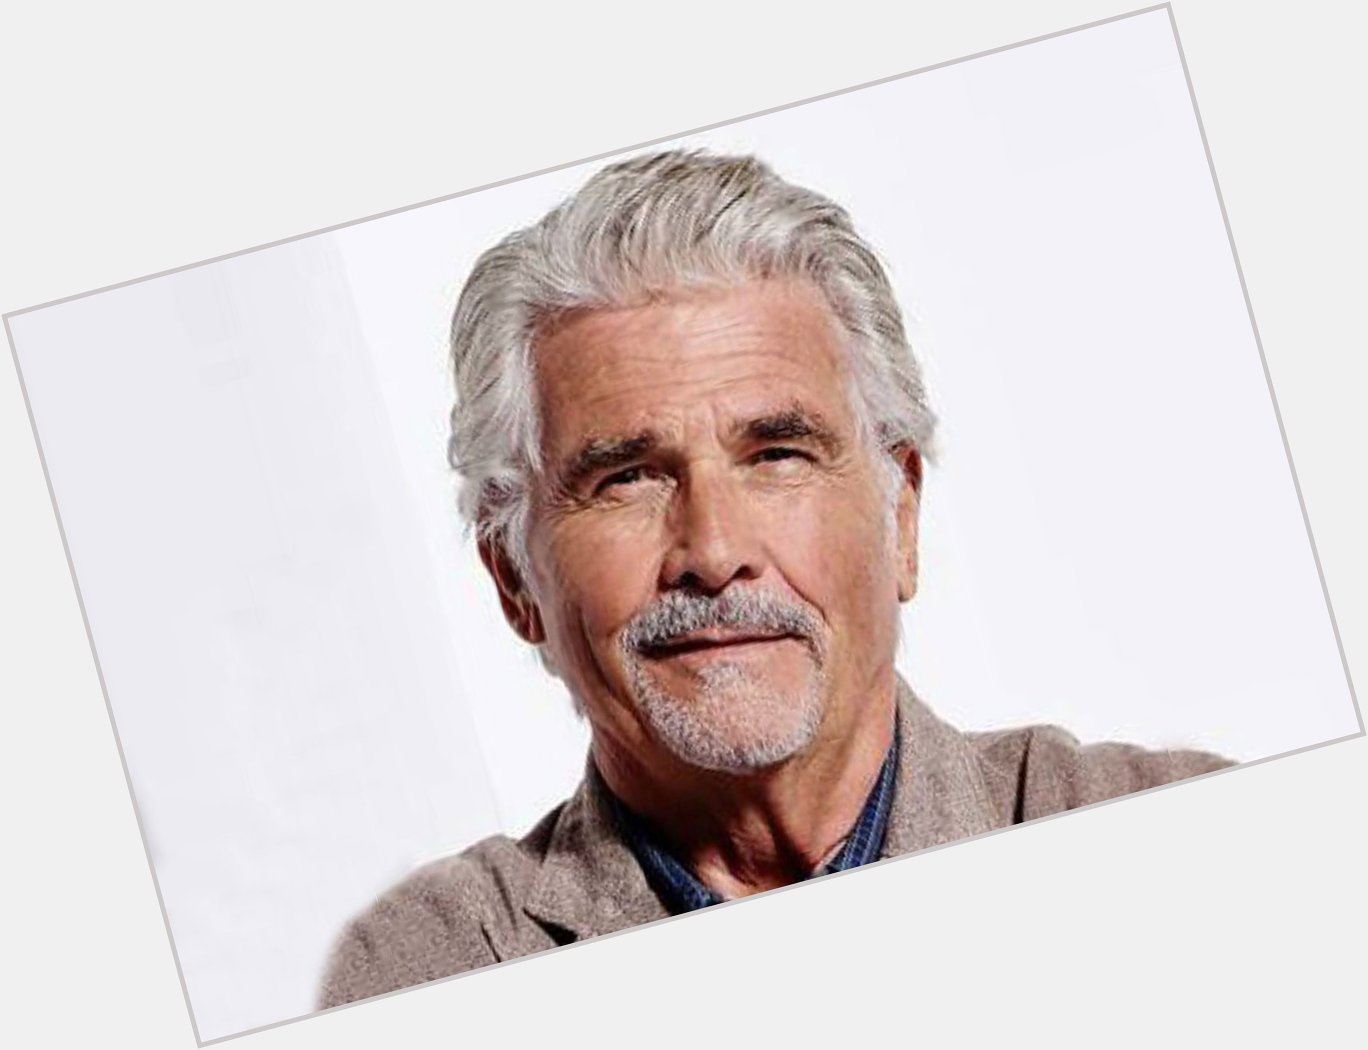 Happy Birthday, James Brolin! Born on this date in 1940 in Los Angeles, CA. 